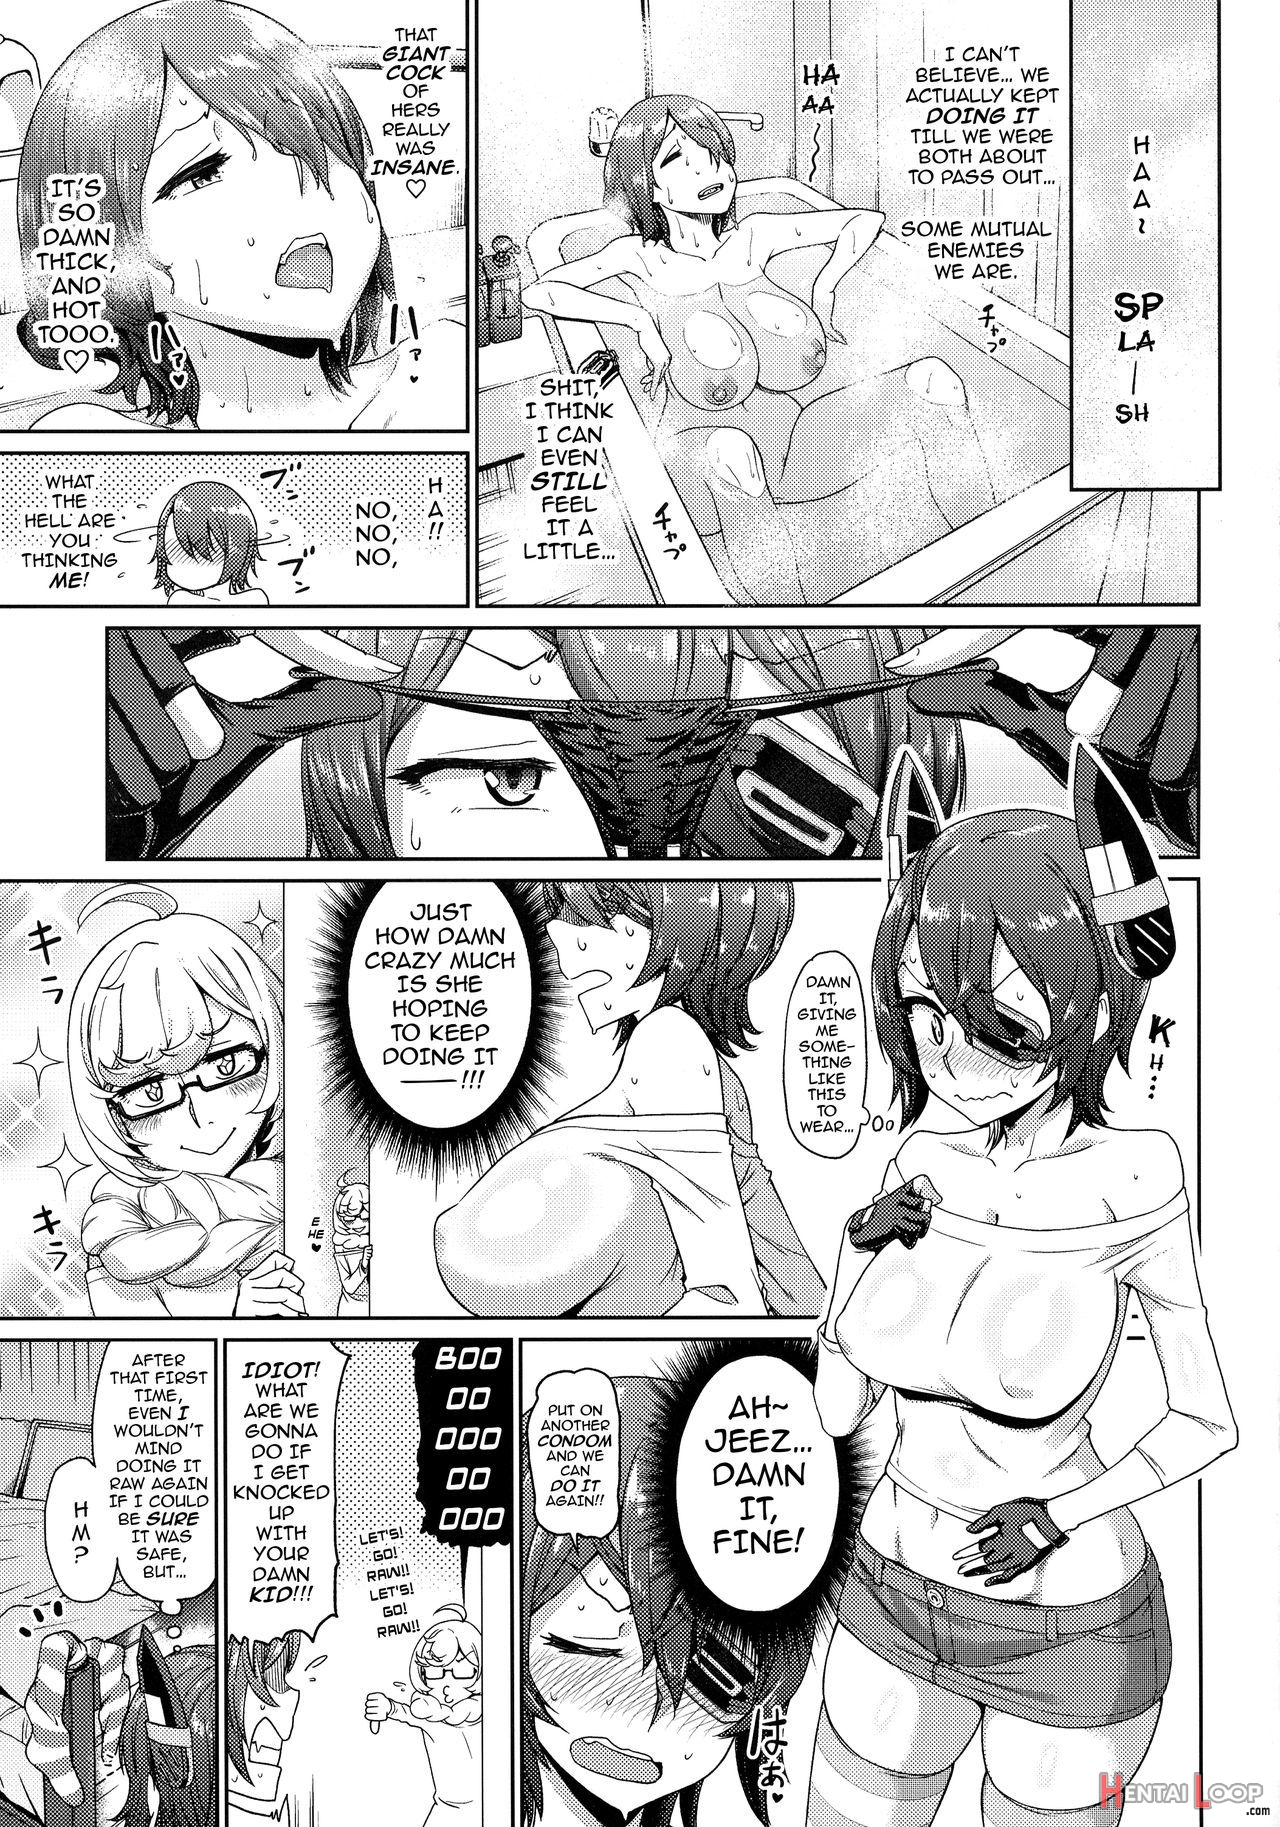 I Told You Supply Depot, This Tenryuu Belongs To You!! page 20